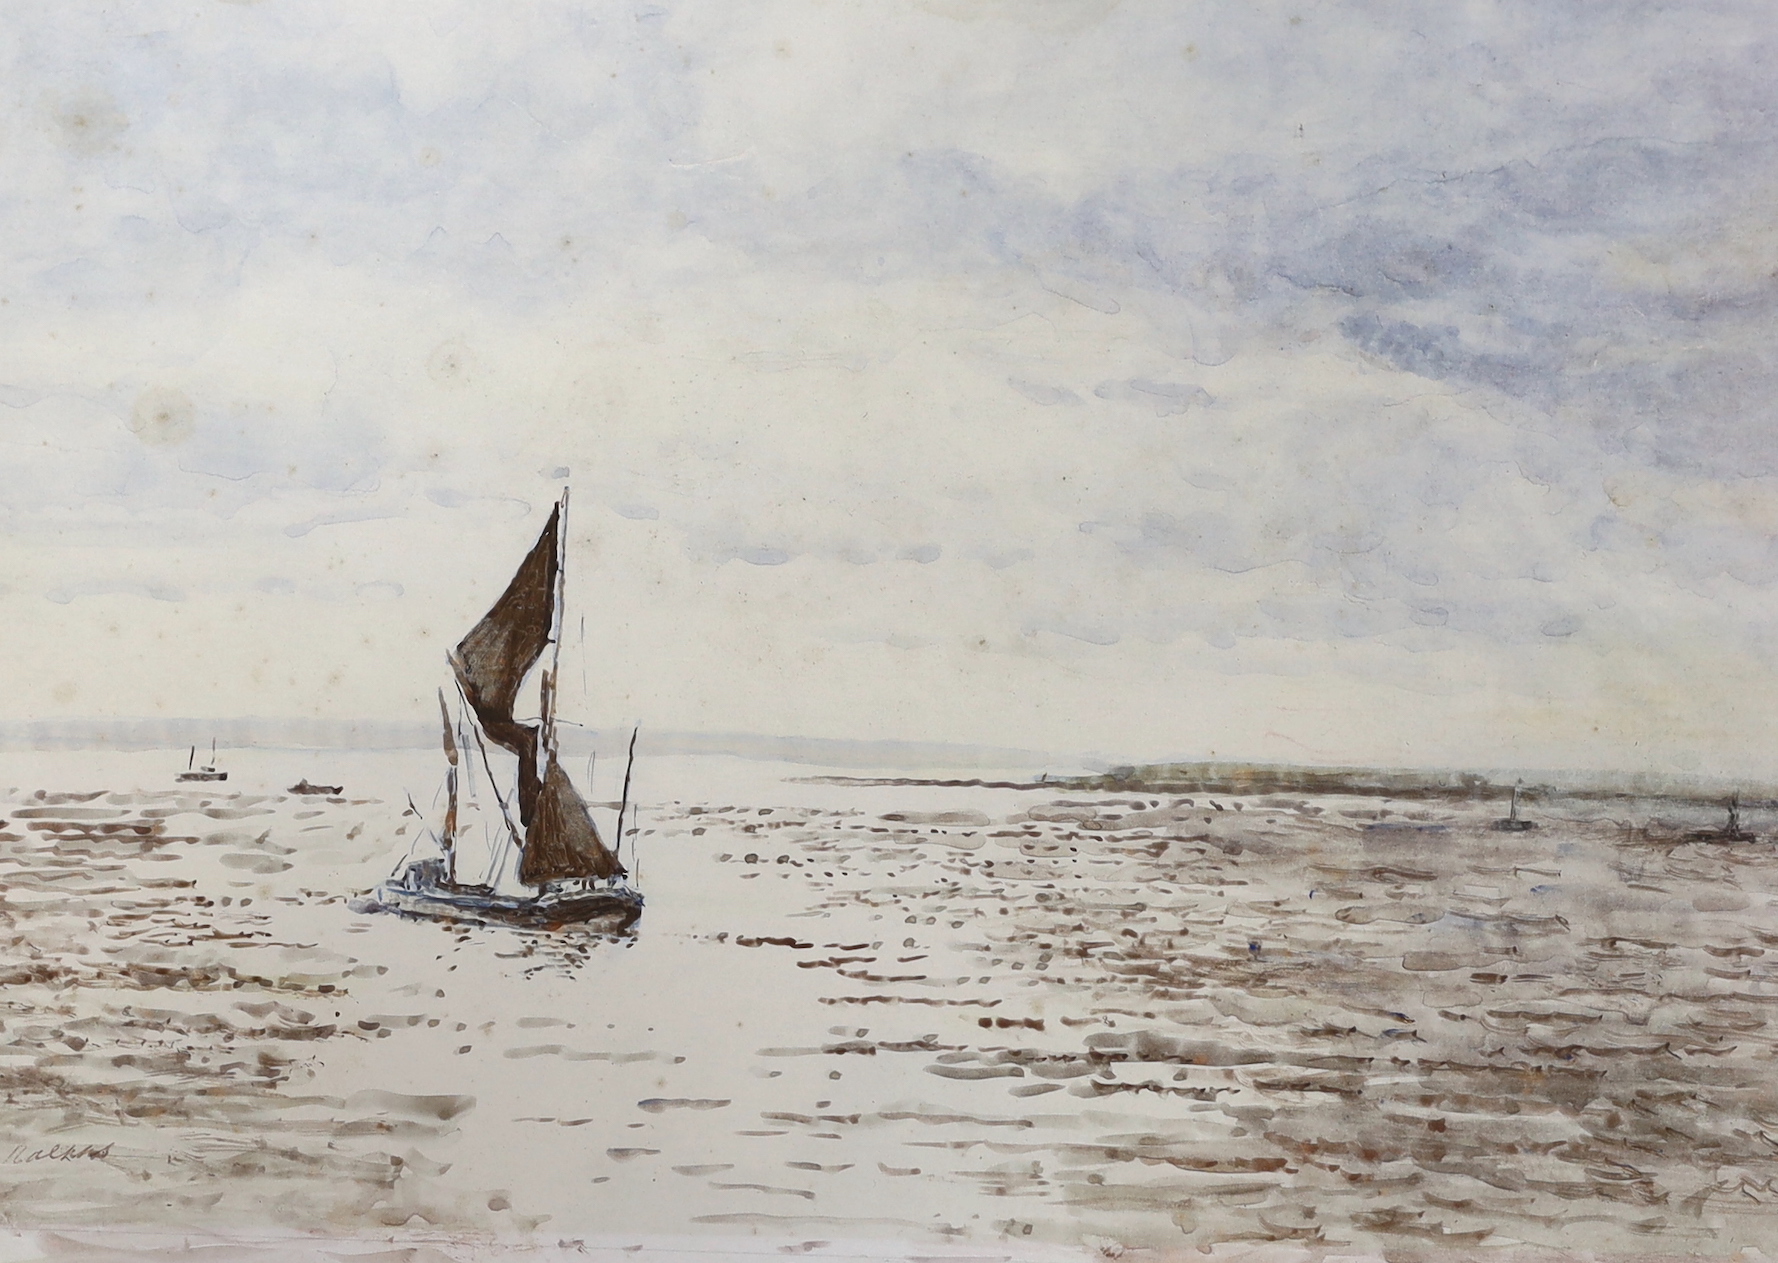 Harry Ralphs (Wapping Group), watercolour, Sail barge off the coast, signed, 27 x 39cm